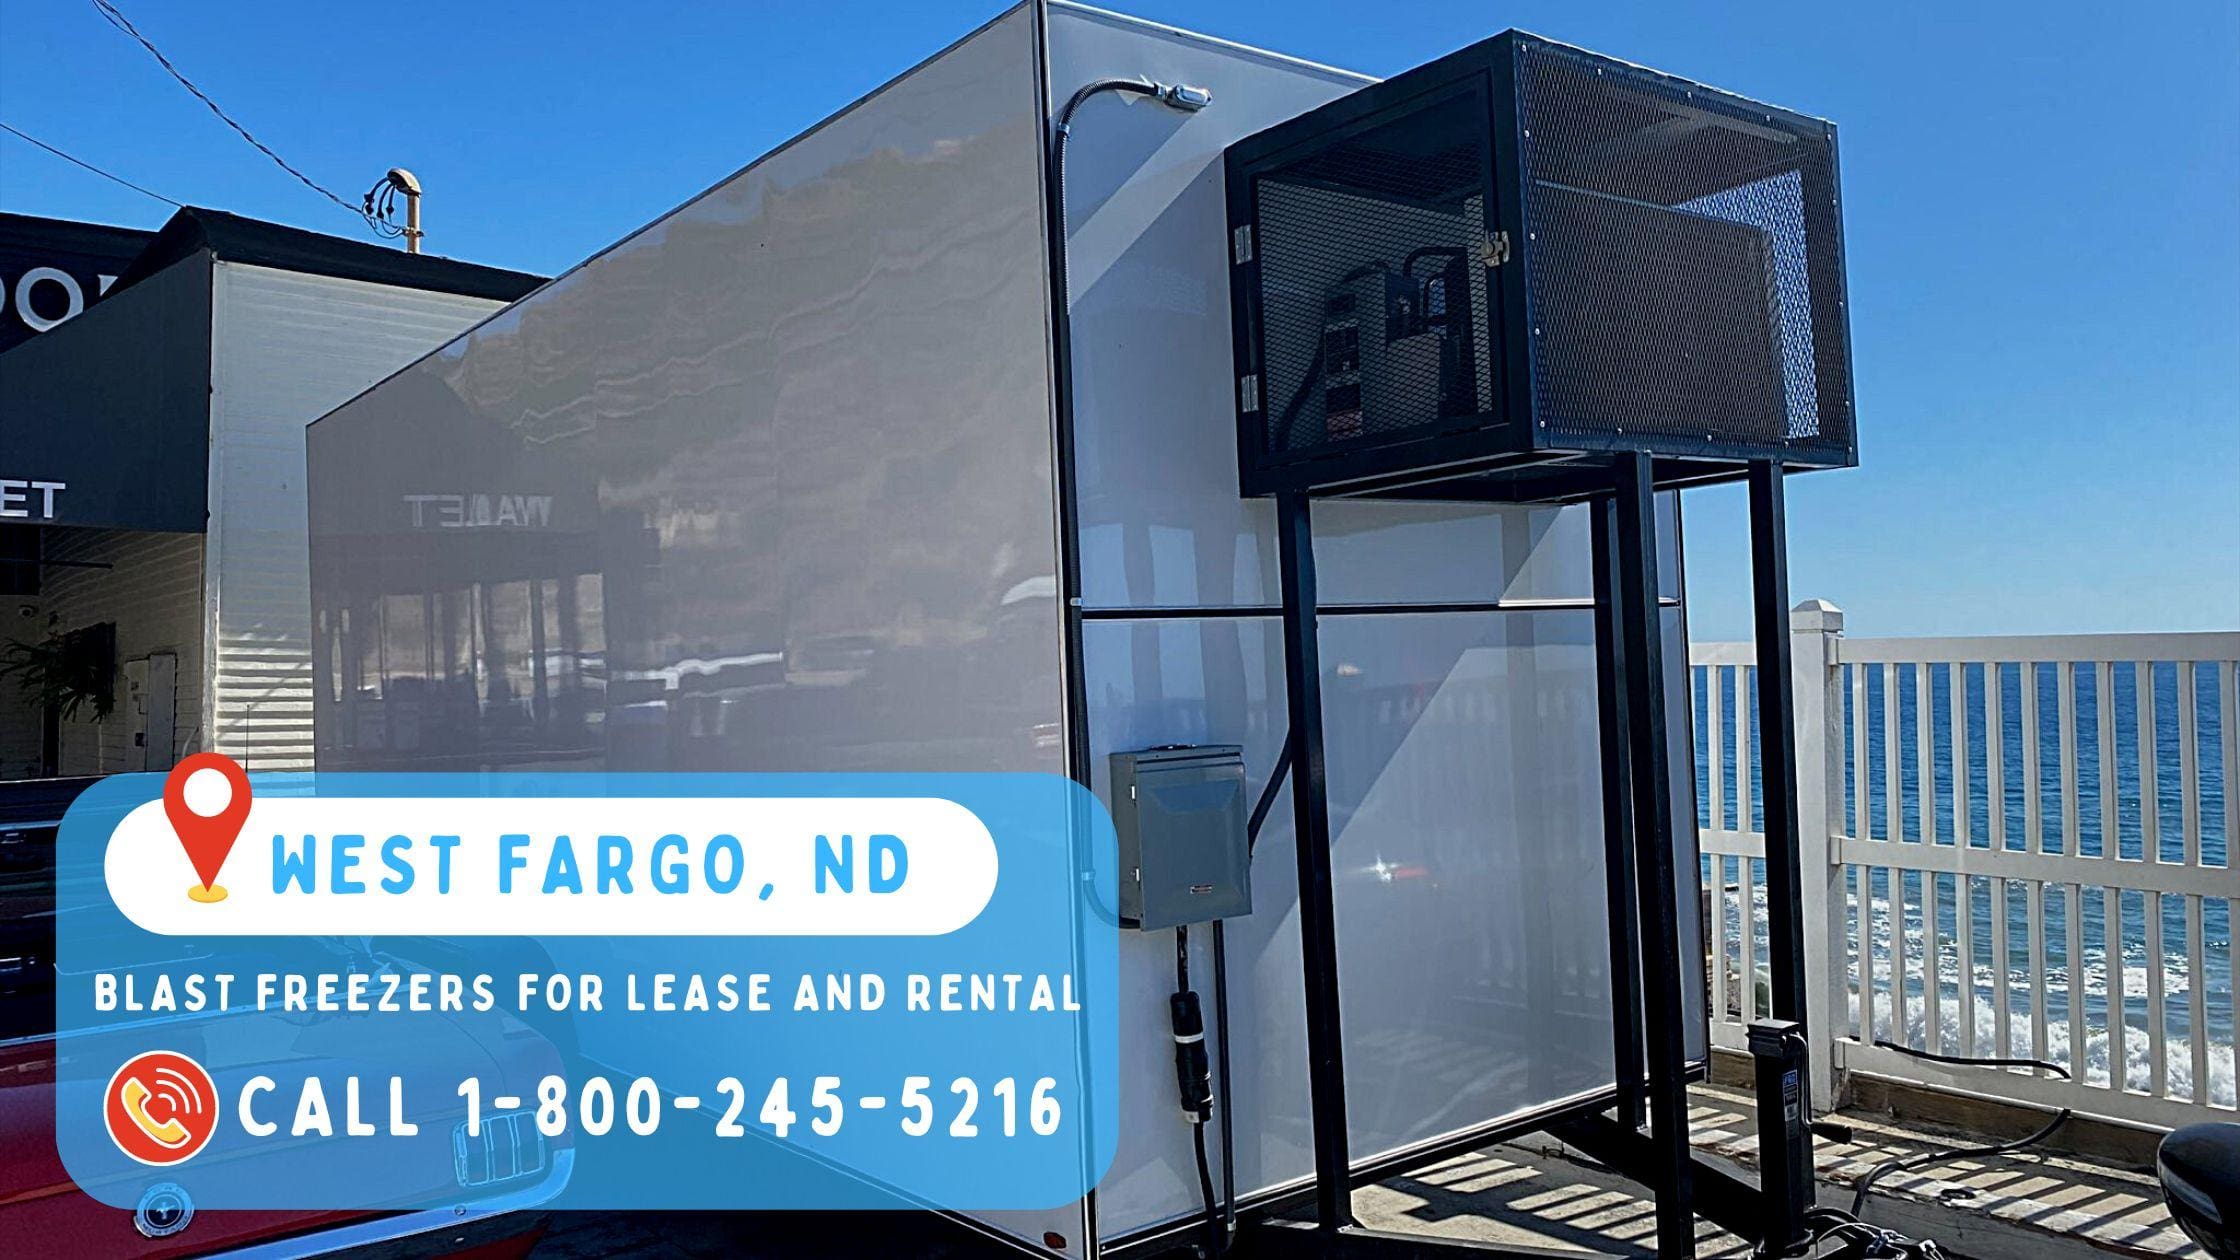 Blast Freezers for Lease and Rental in West Fargo